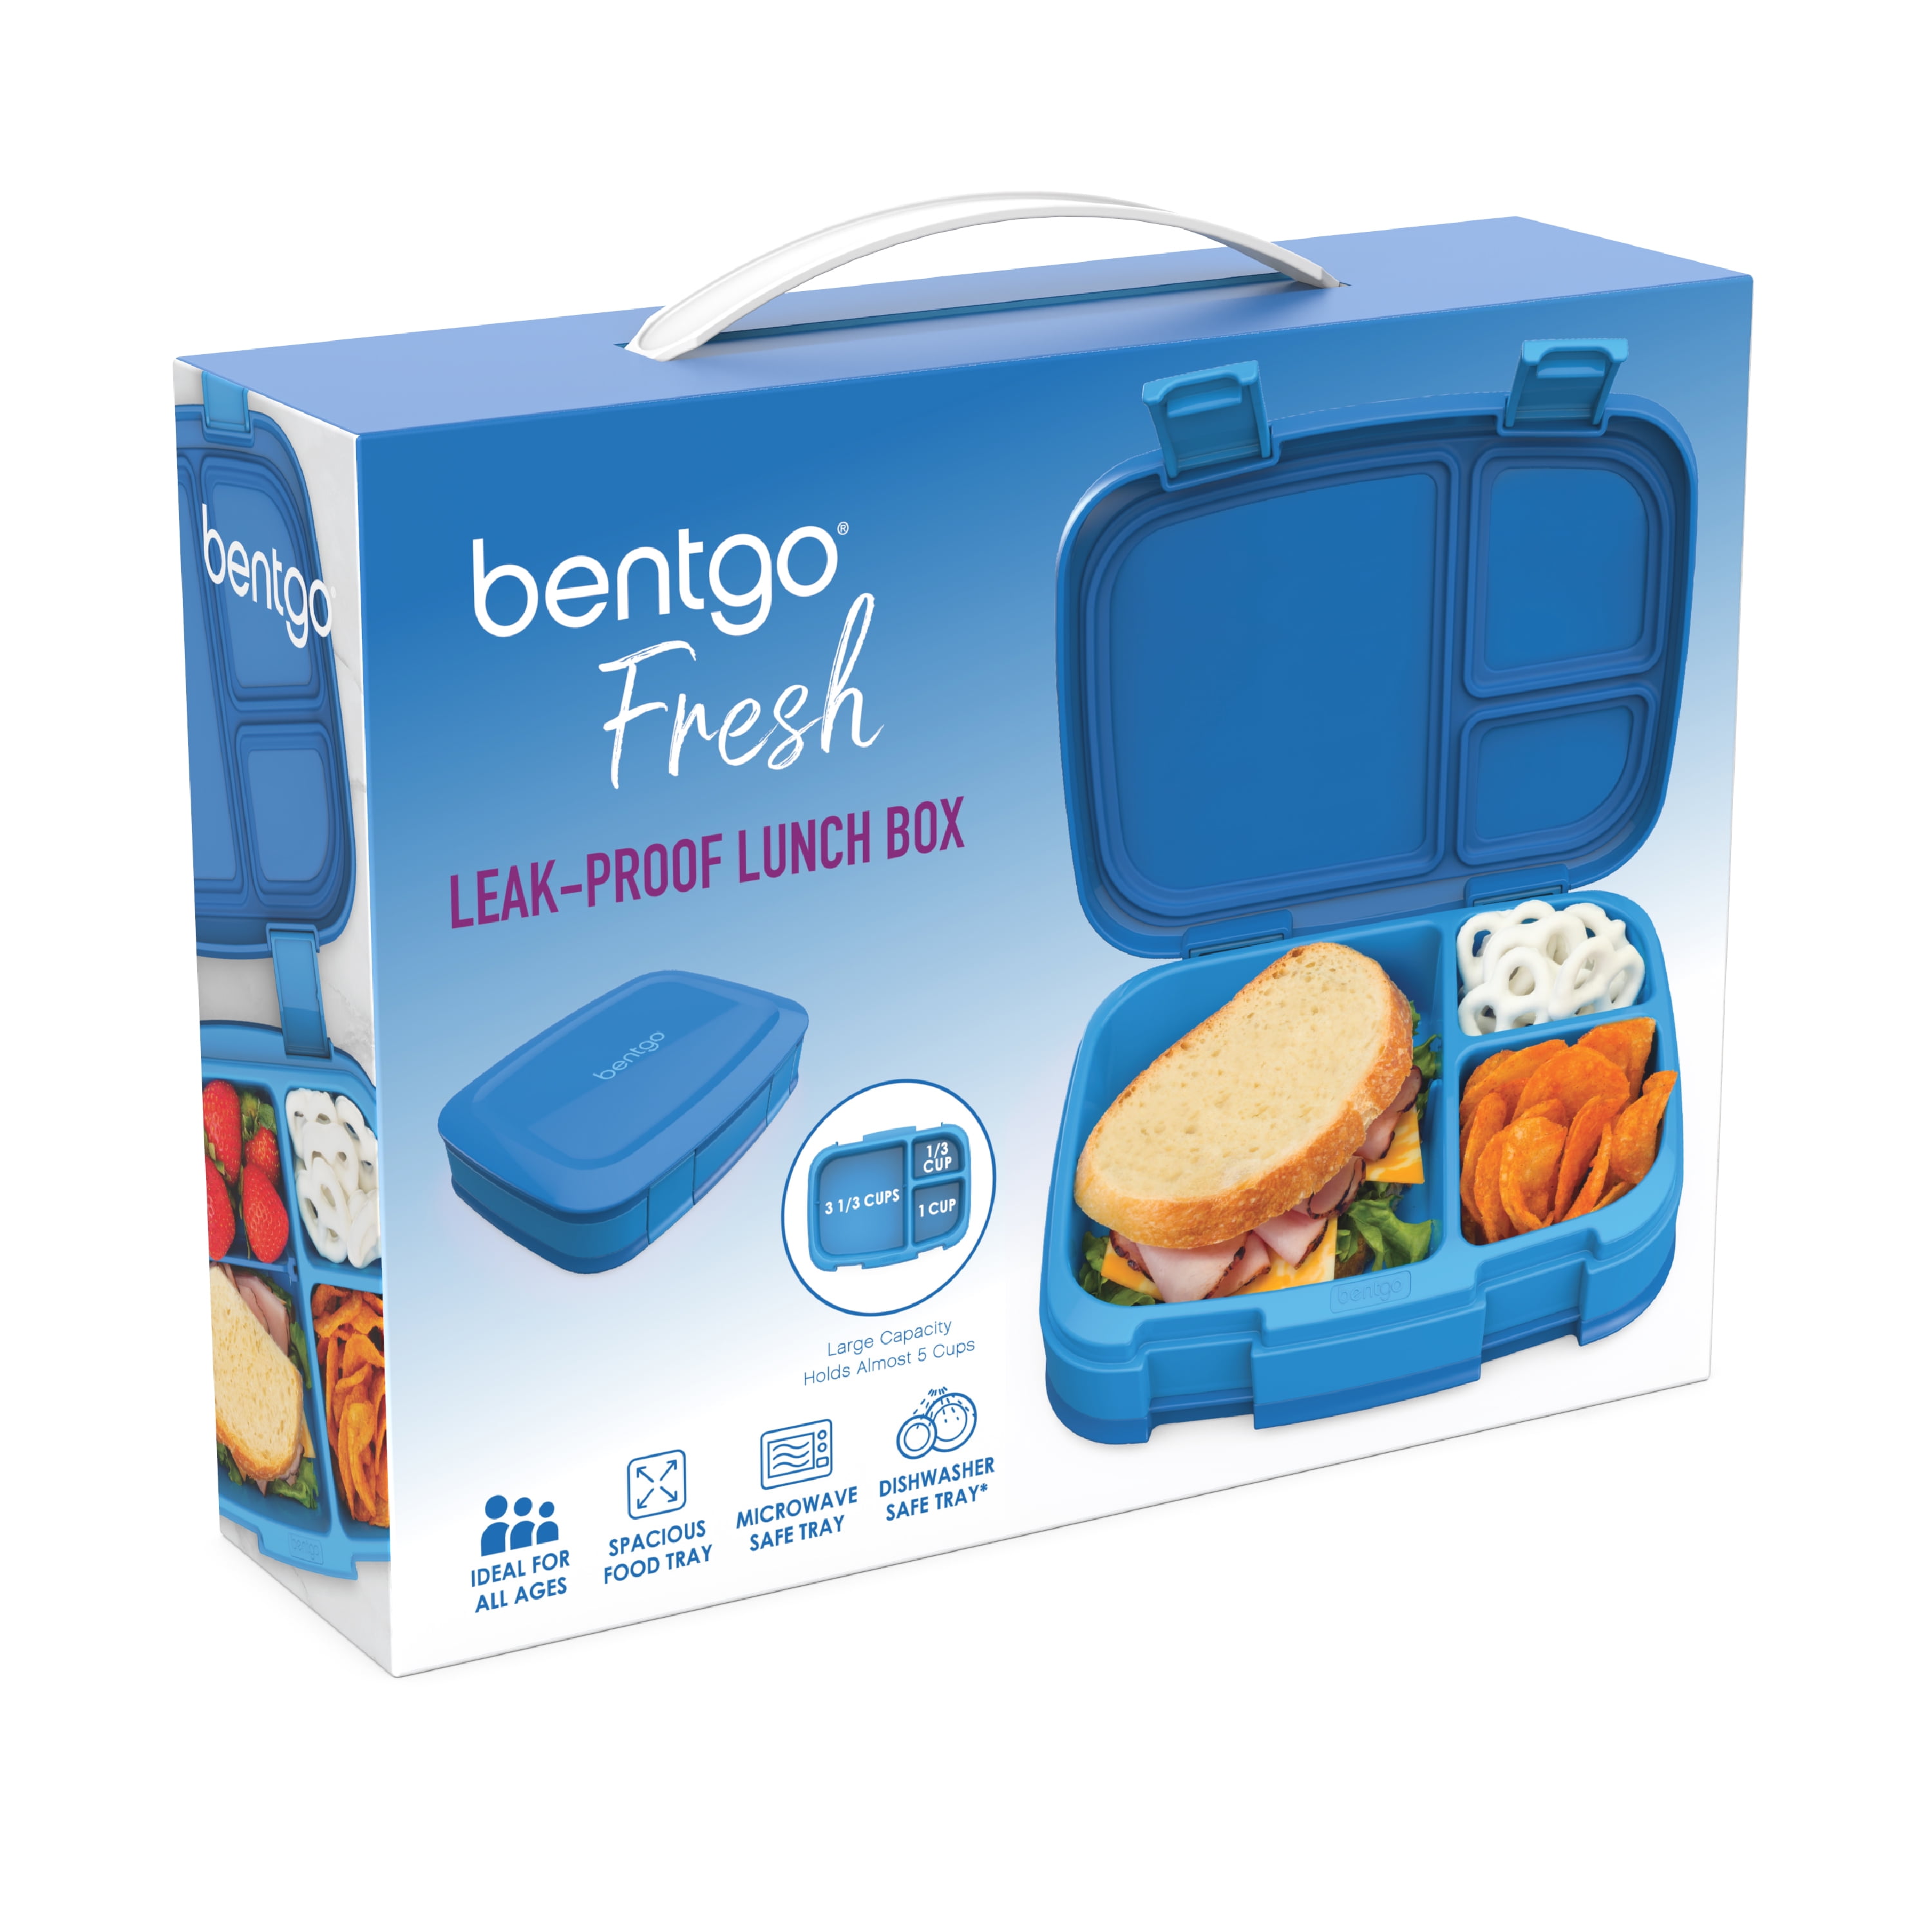 Wagindd Bento Lunch Box Kids and Adults, Leak-Proof Stackable Bento Box with 4 Compartments - BPA-Free, Dishwasher & Microwave Safe